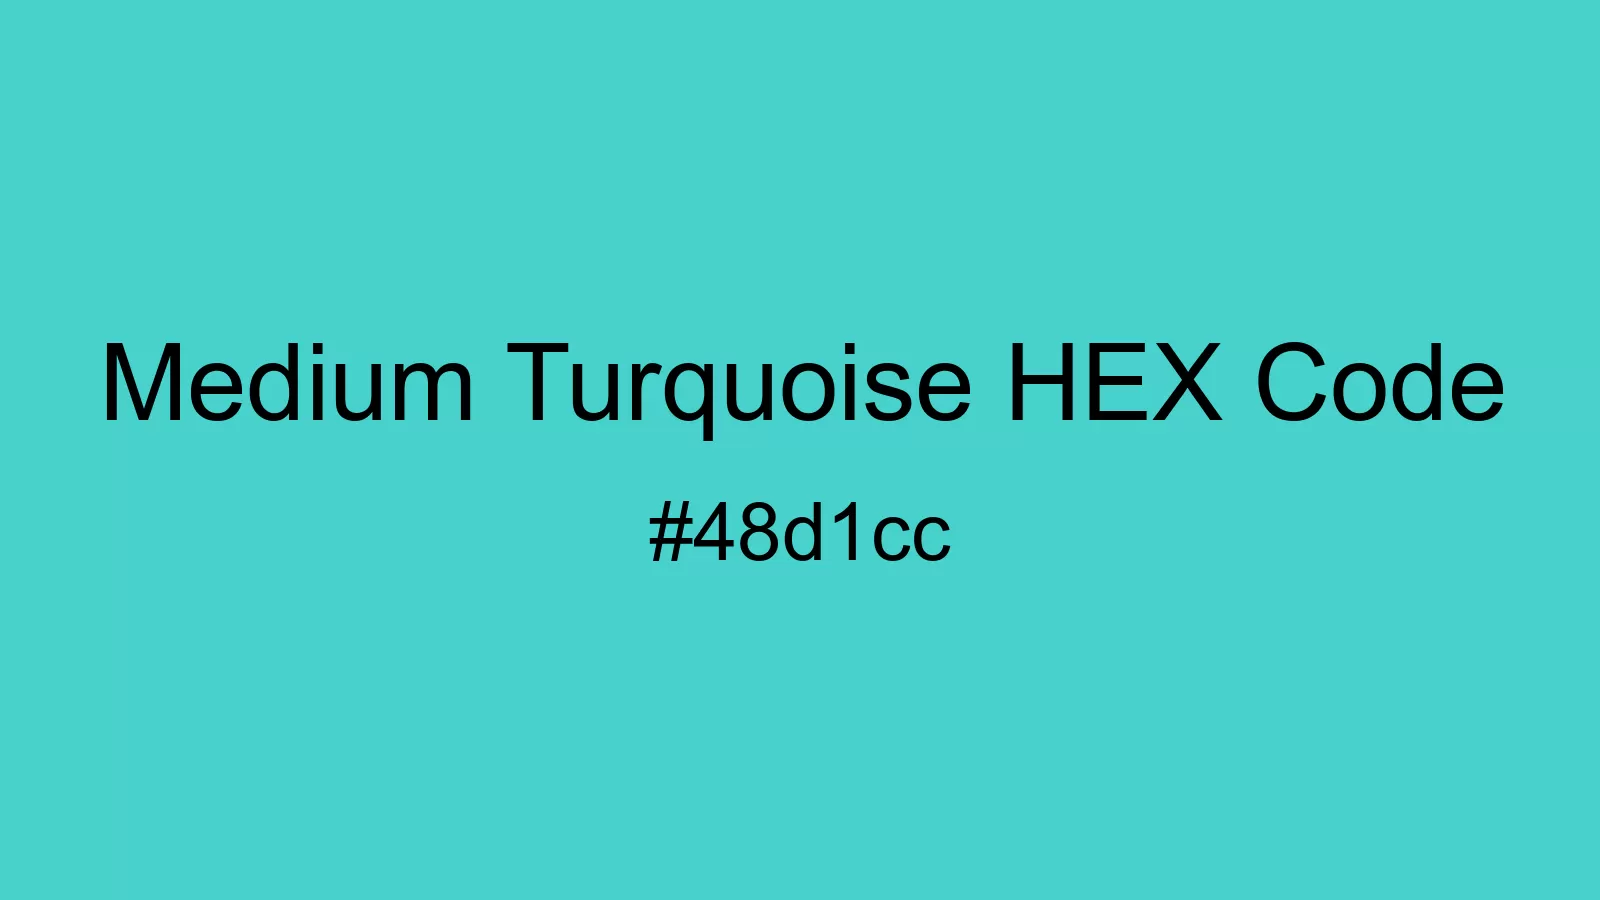 preview image of Medium Turquoise color and HEX code